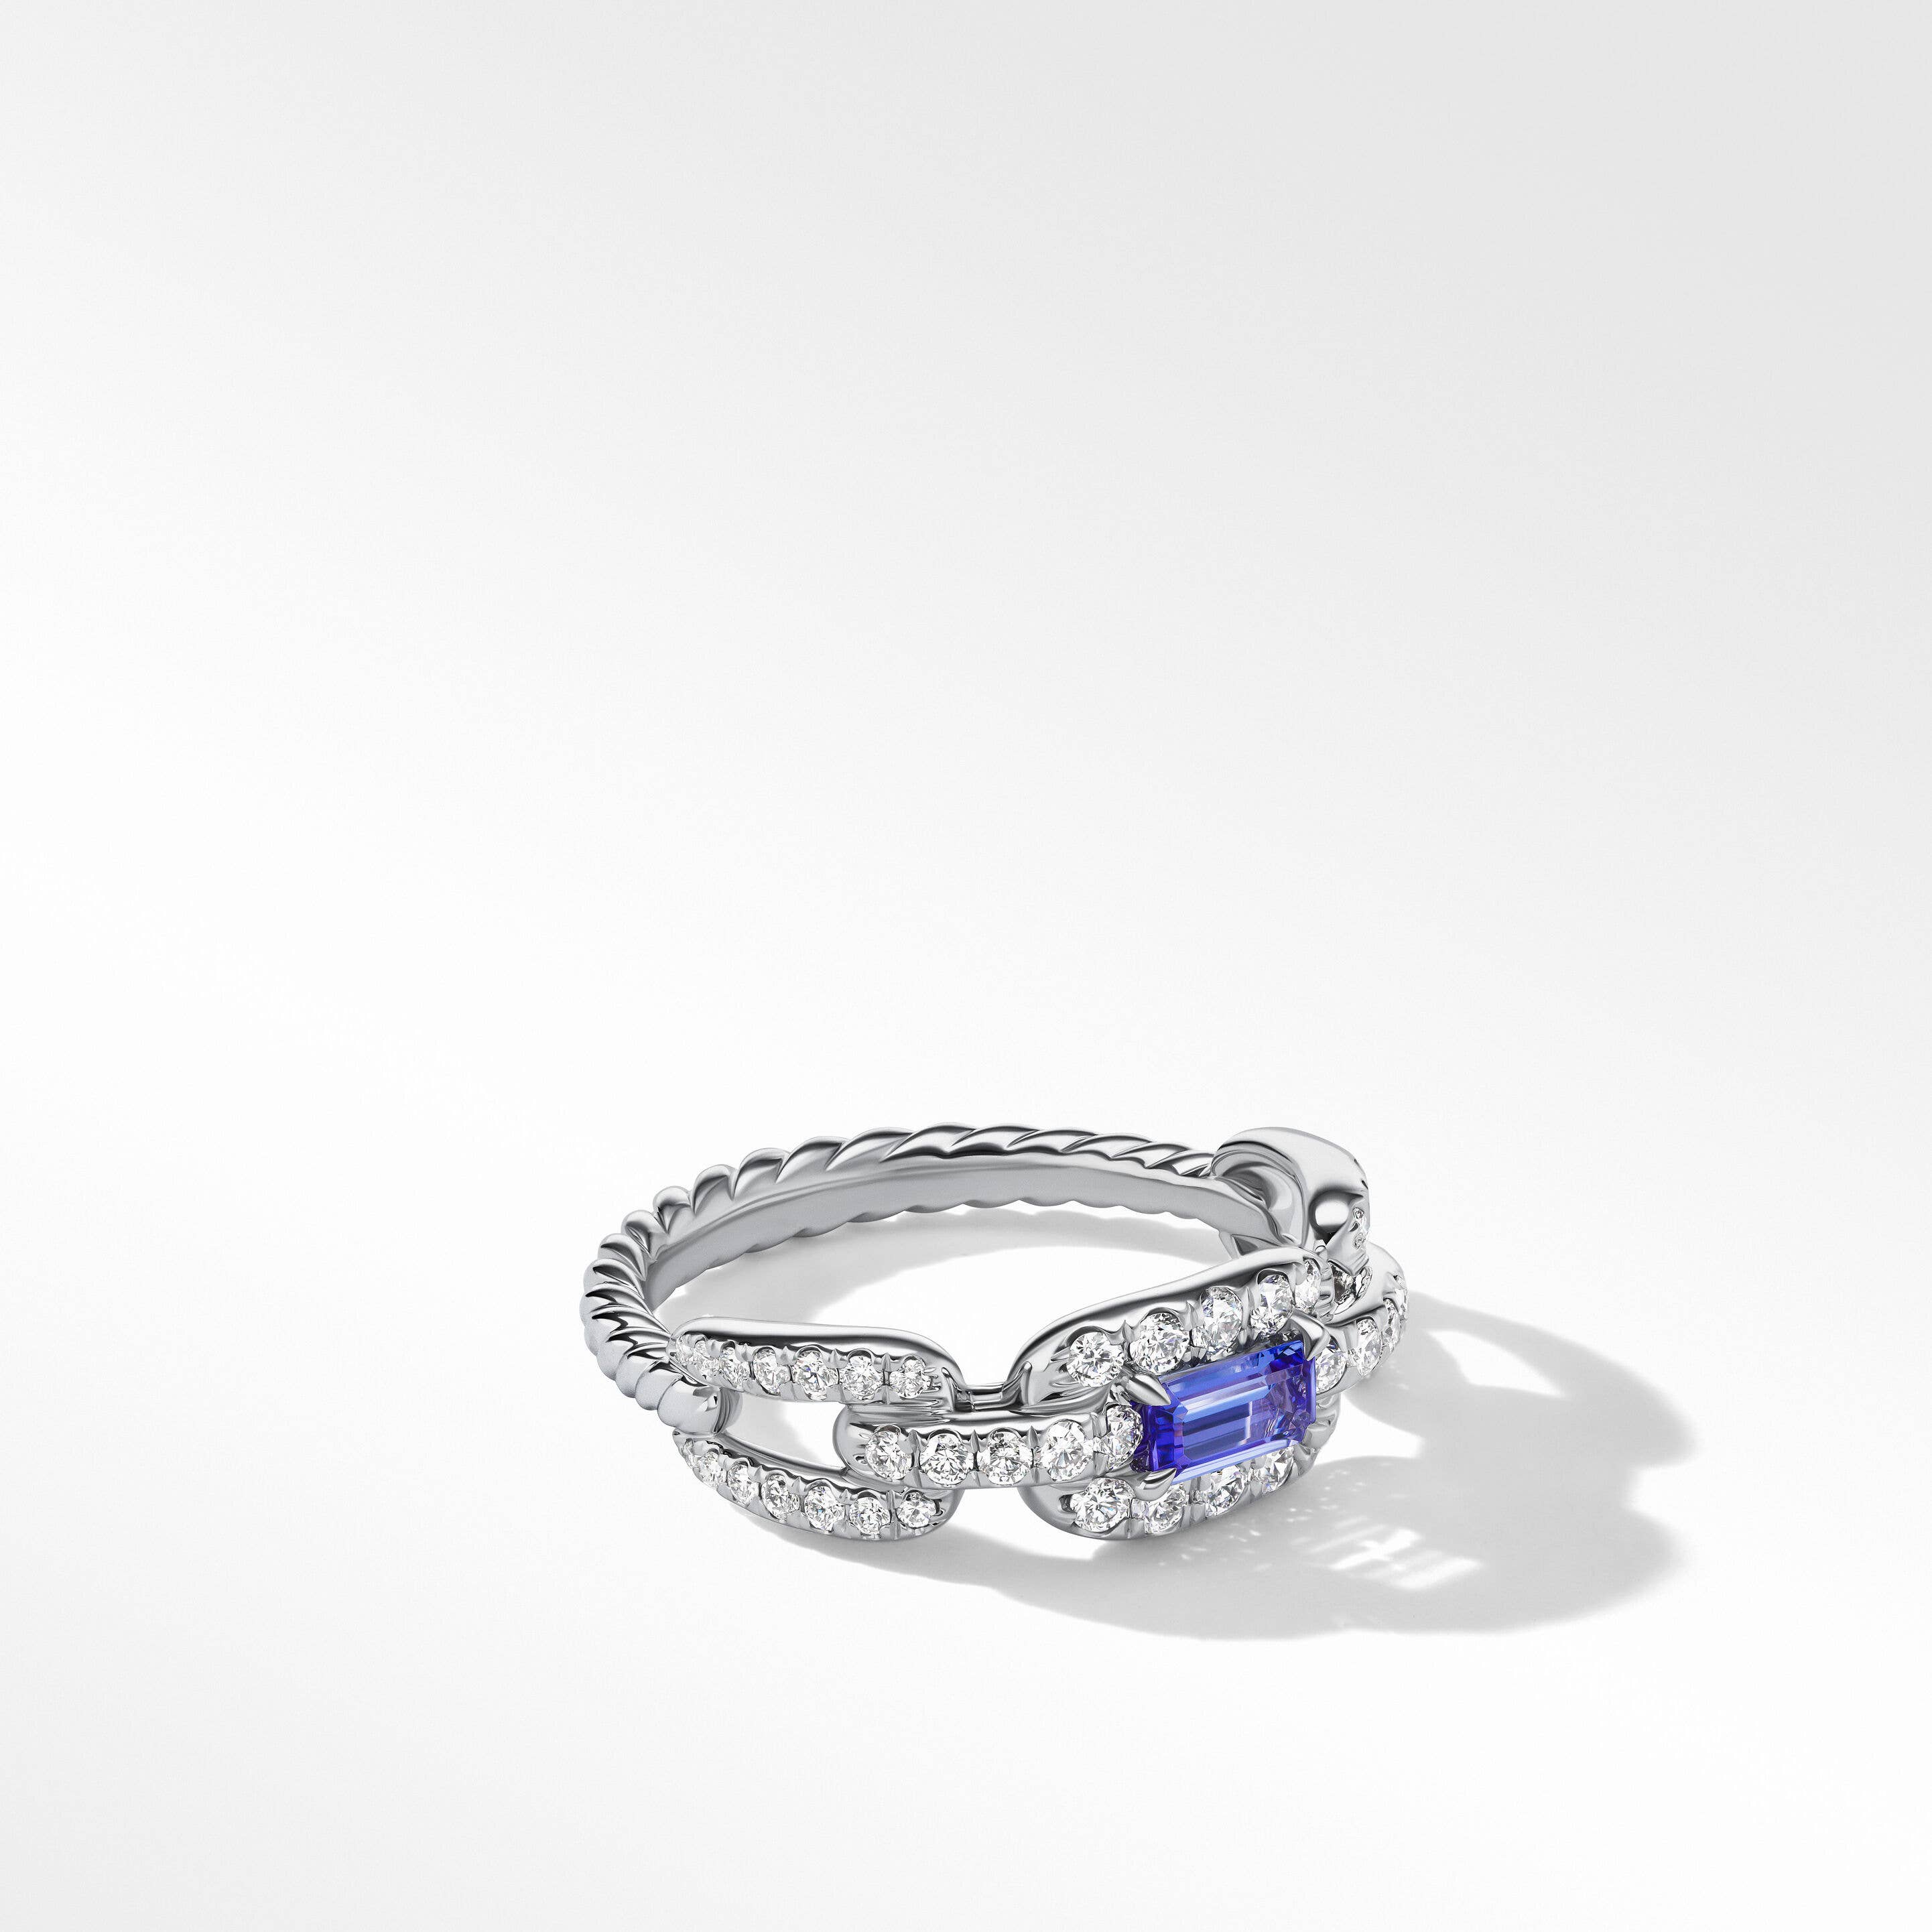 Stax Chain Link Stone Ring in 18K White Gold with Pavé Diamonds and Tanzanite